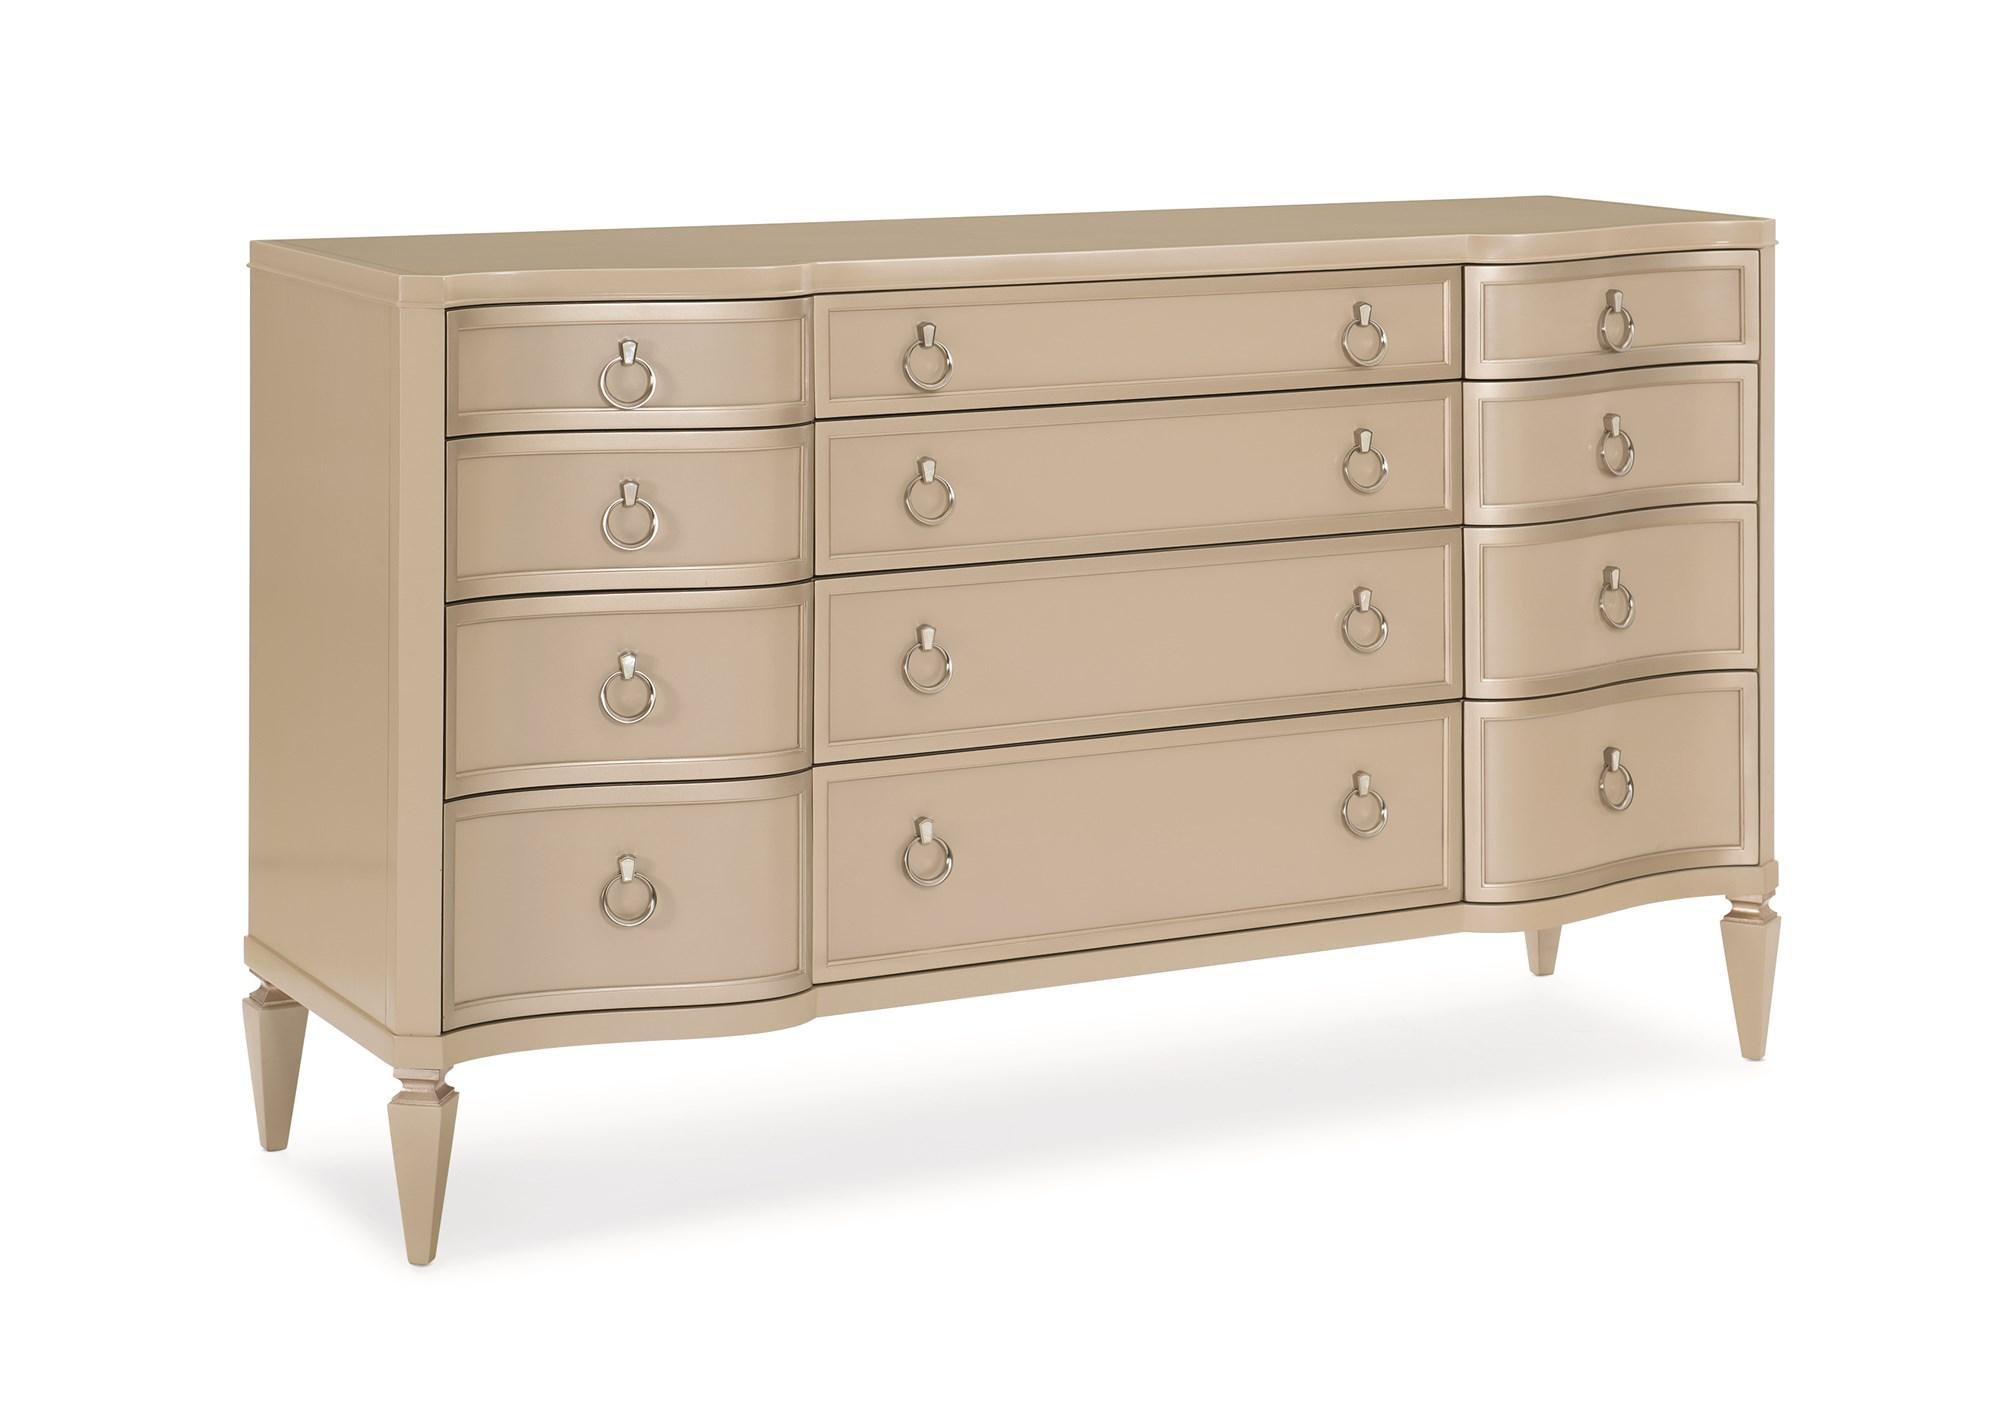 Contemporary Dresser PULL IT ALL TOGETHER CLA-017-032 in Cream 